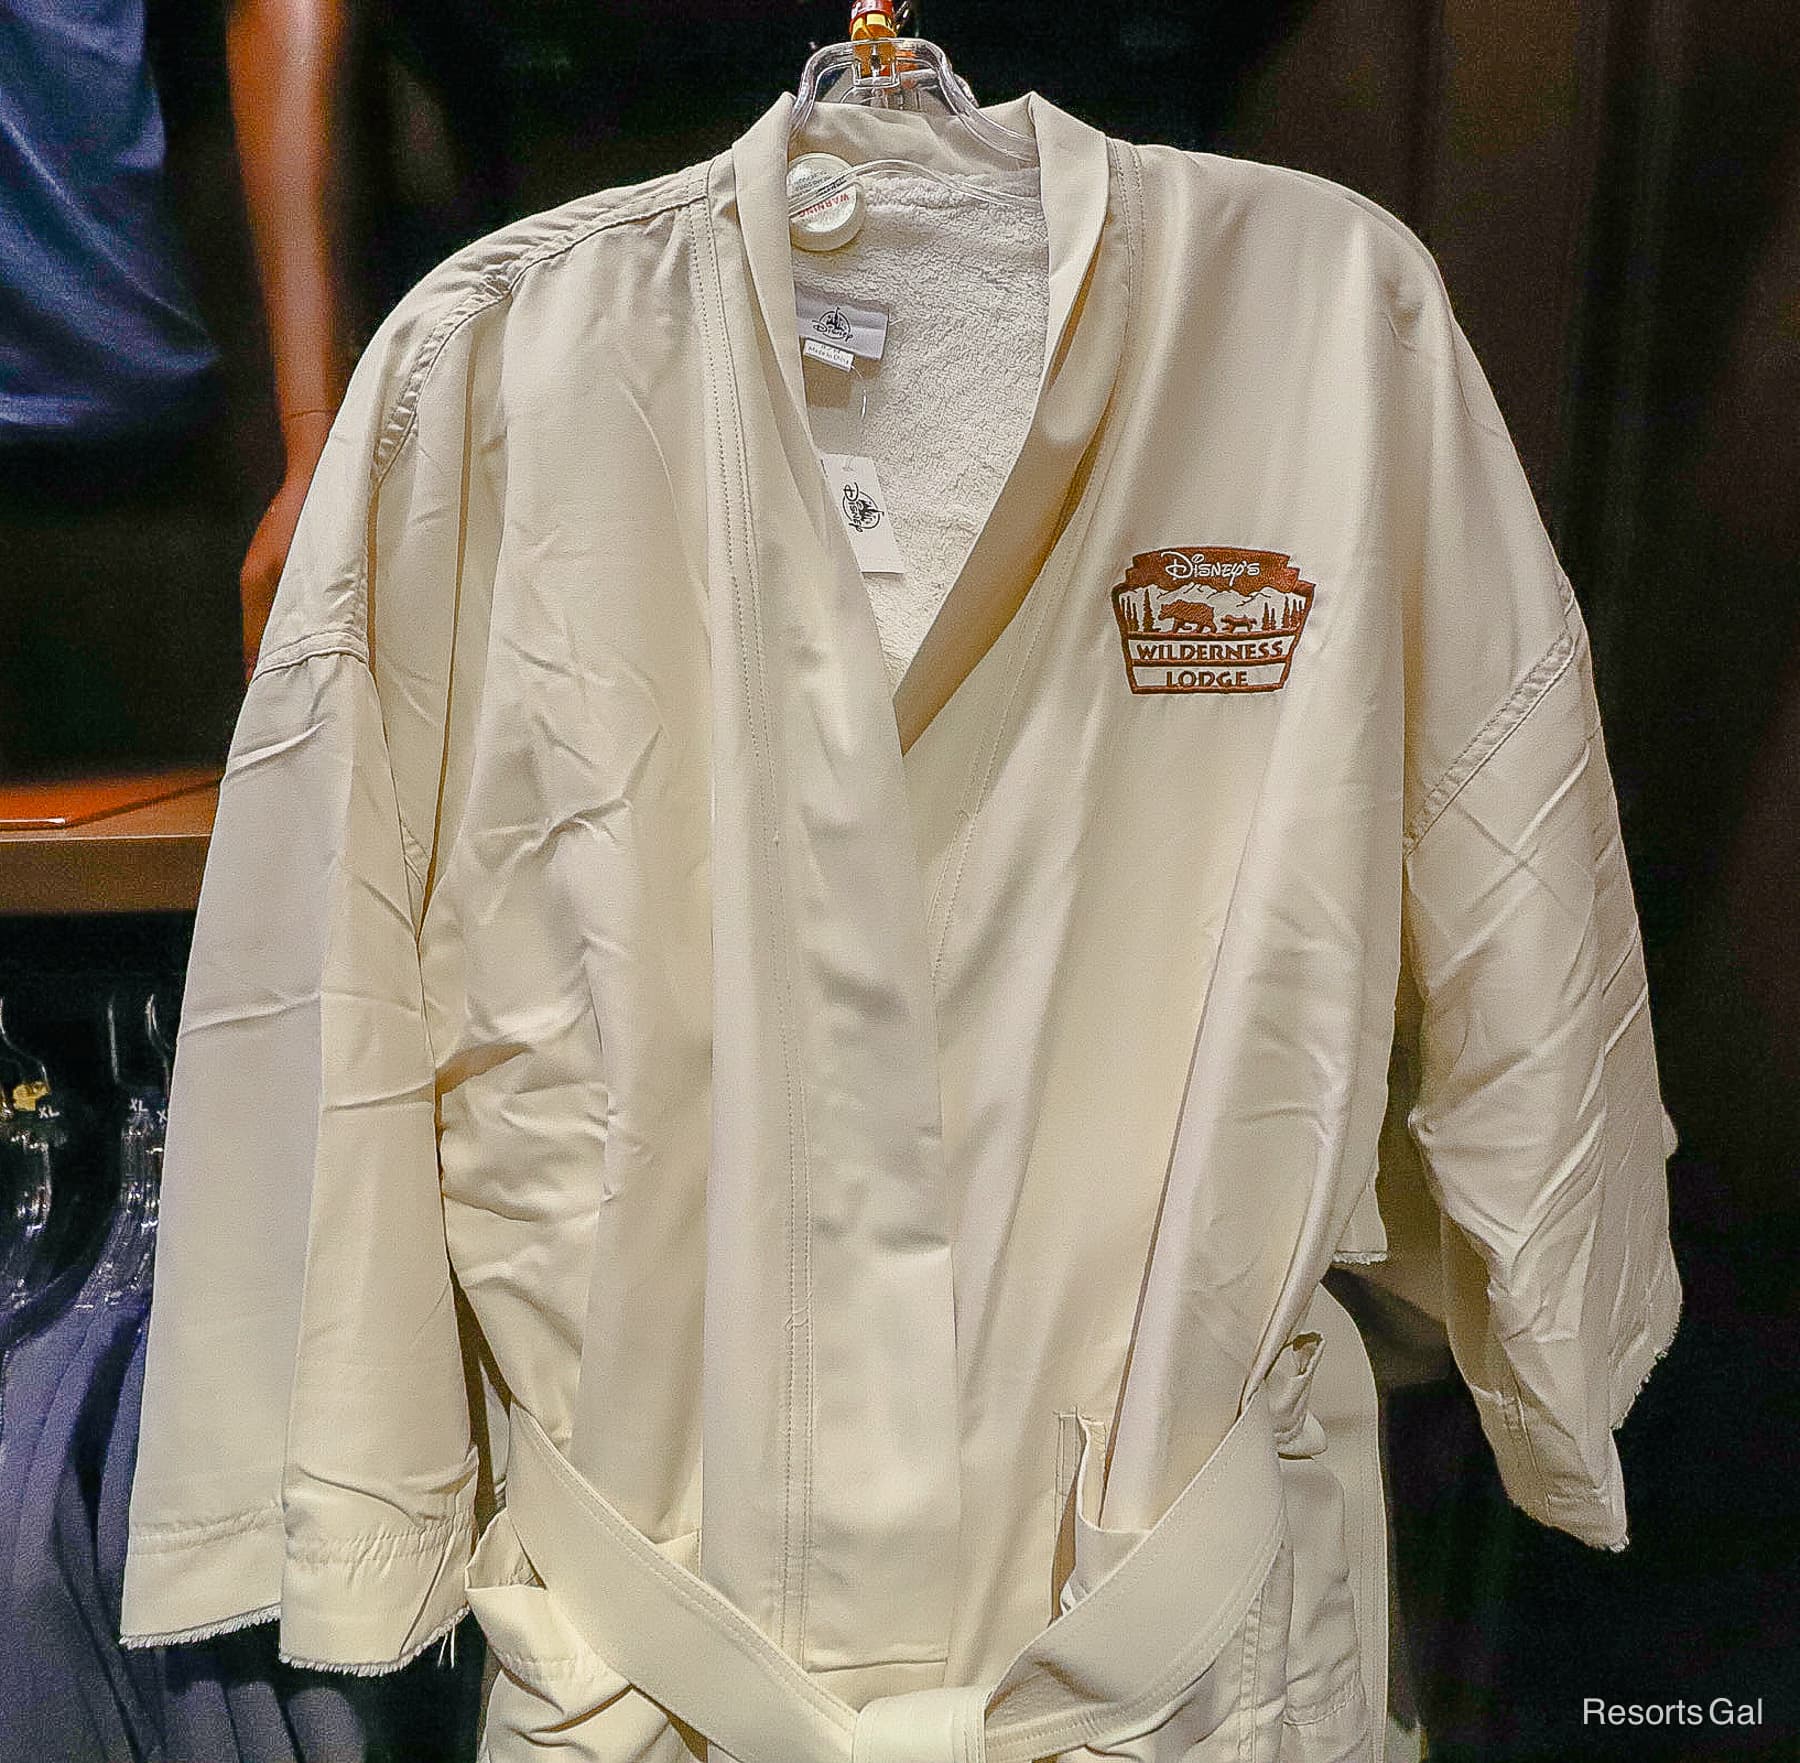 resort robe in a cream color with the Wilderness Lodge logo in brown 